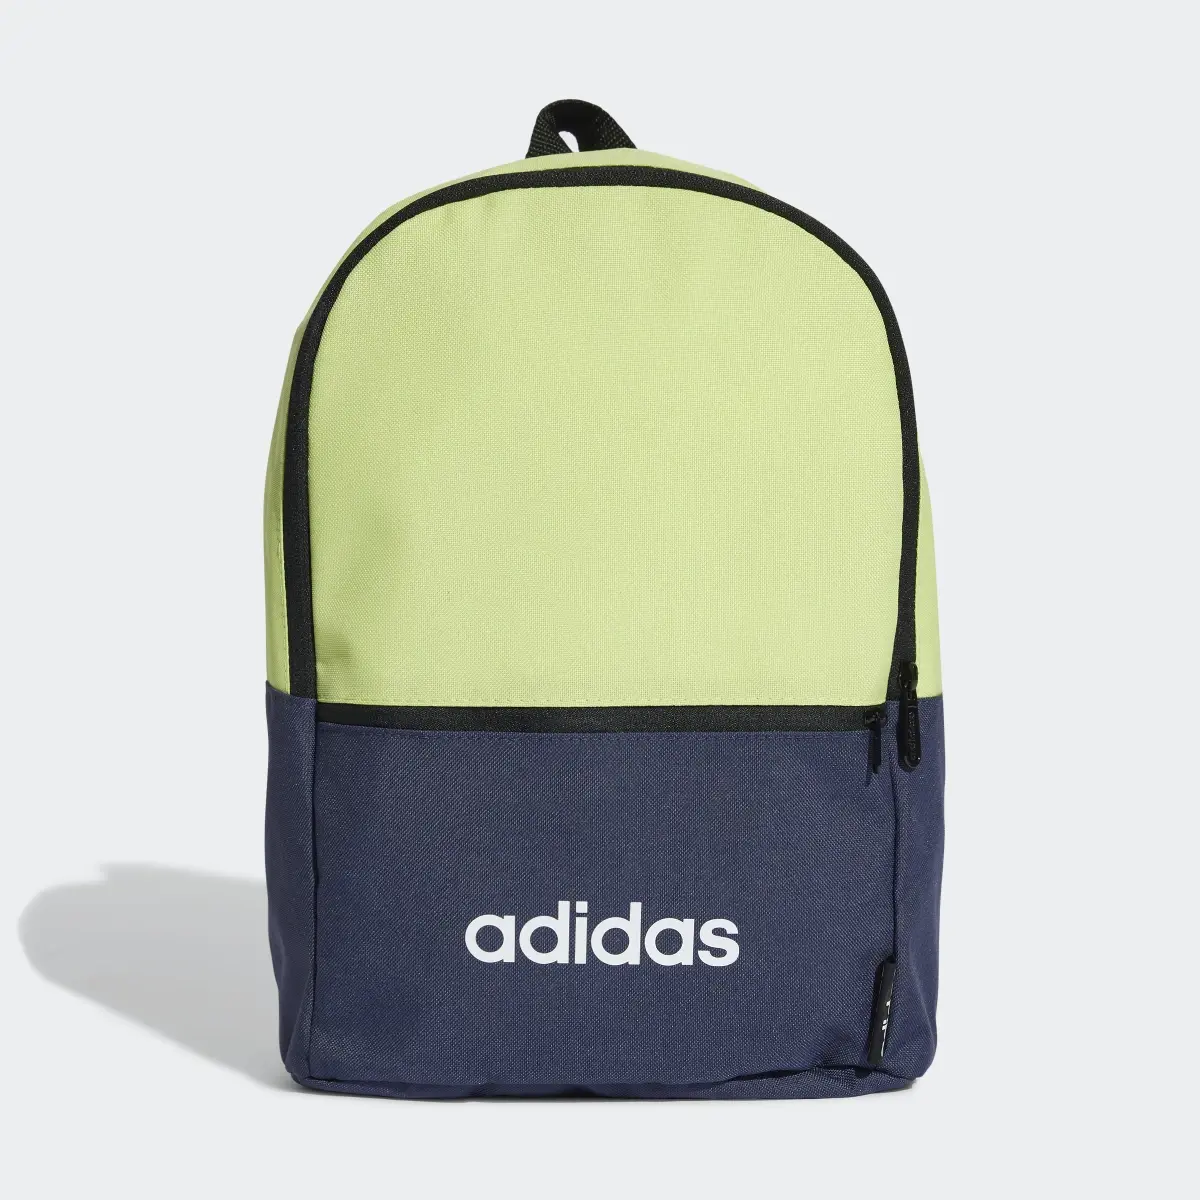 Adidas CLASSIC BACKPACK. 2